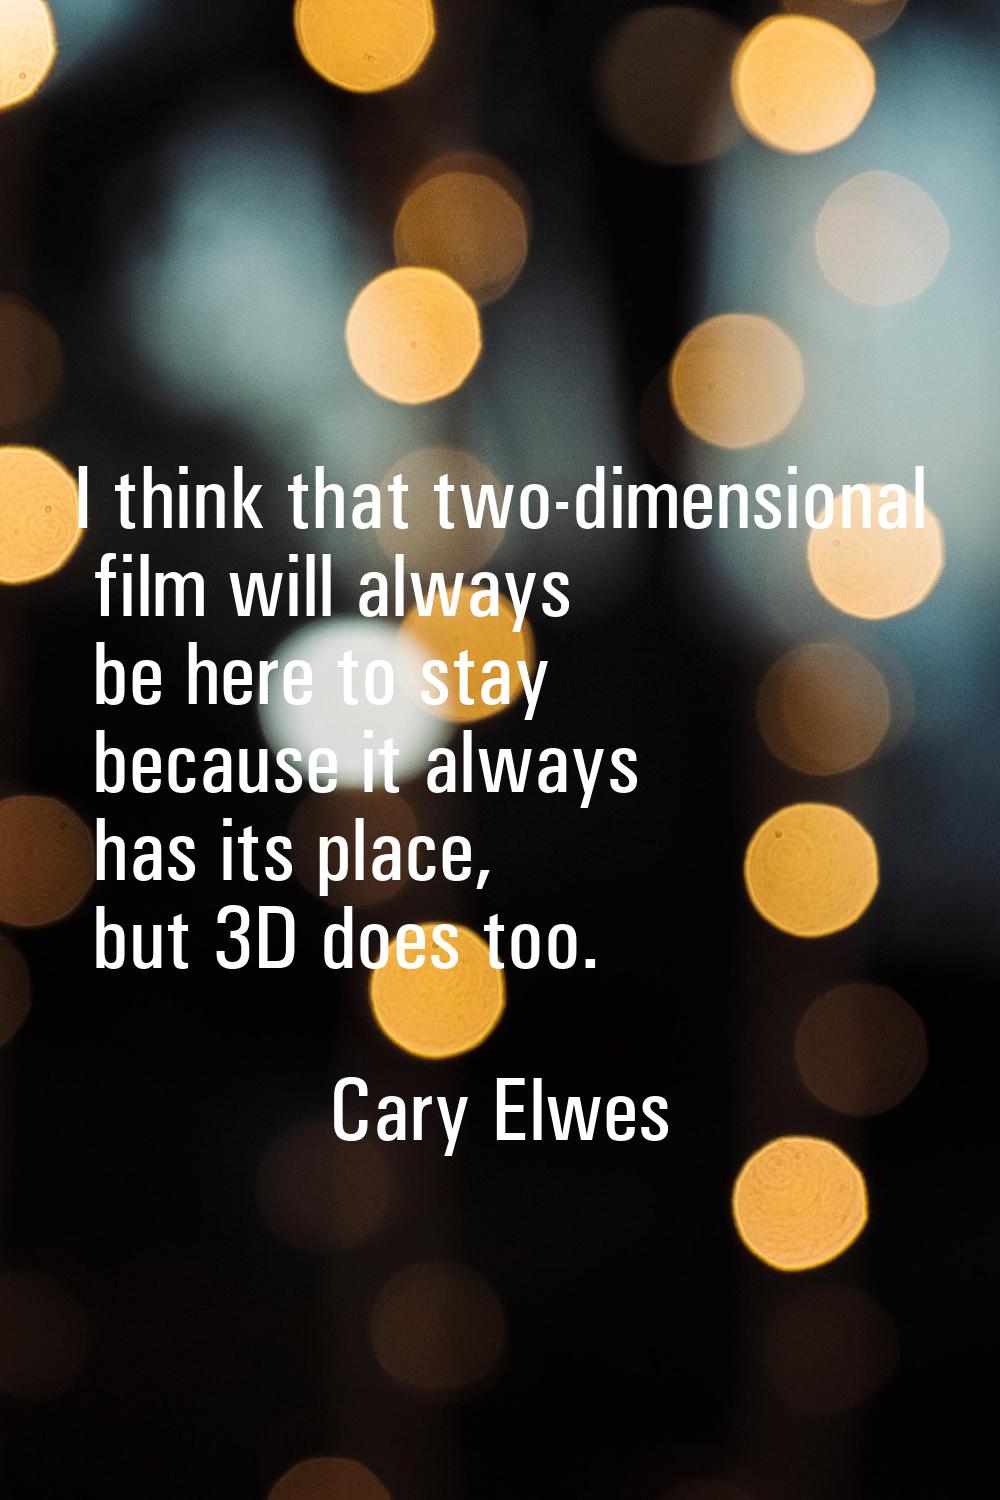 I think that two-dimensional film will always be here to stay because it always has its place, but 